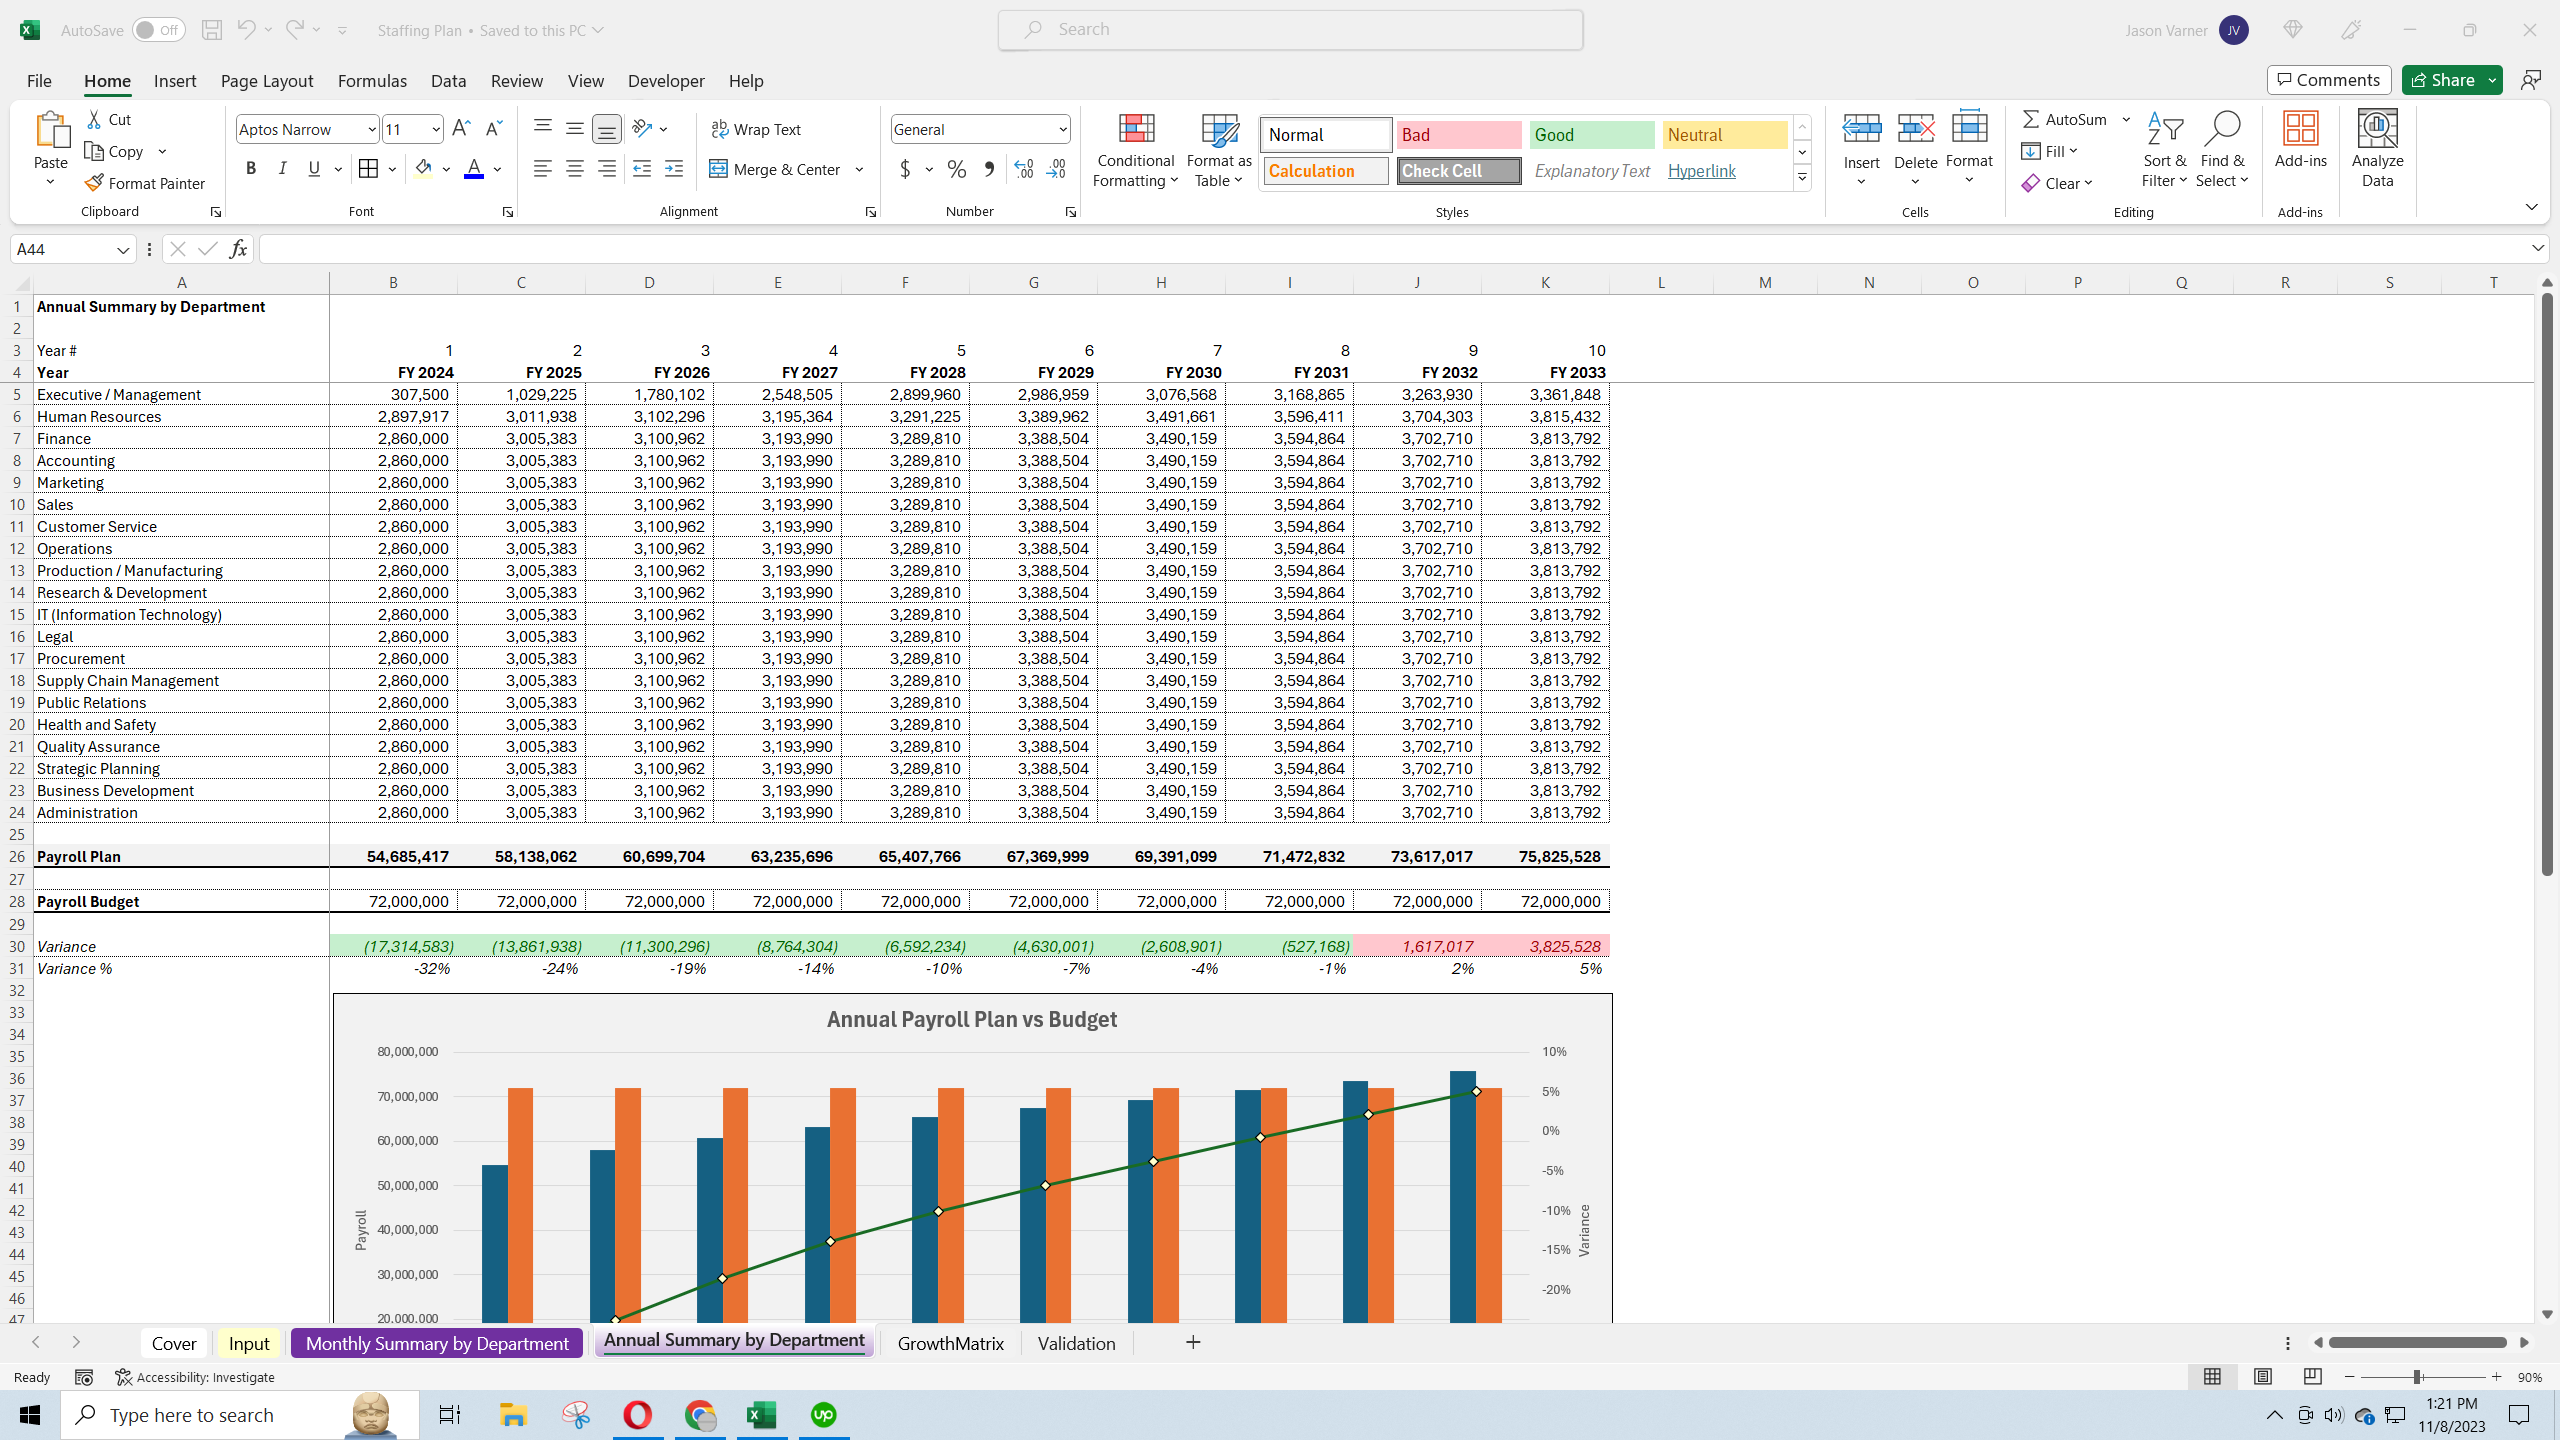 Staffing Cost Projection Plan (Excel template (XLSX)) Preview Image